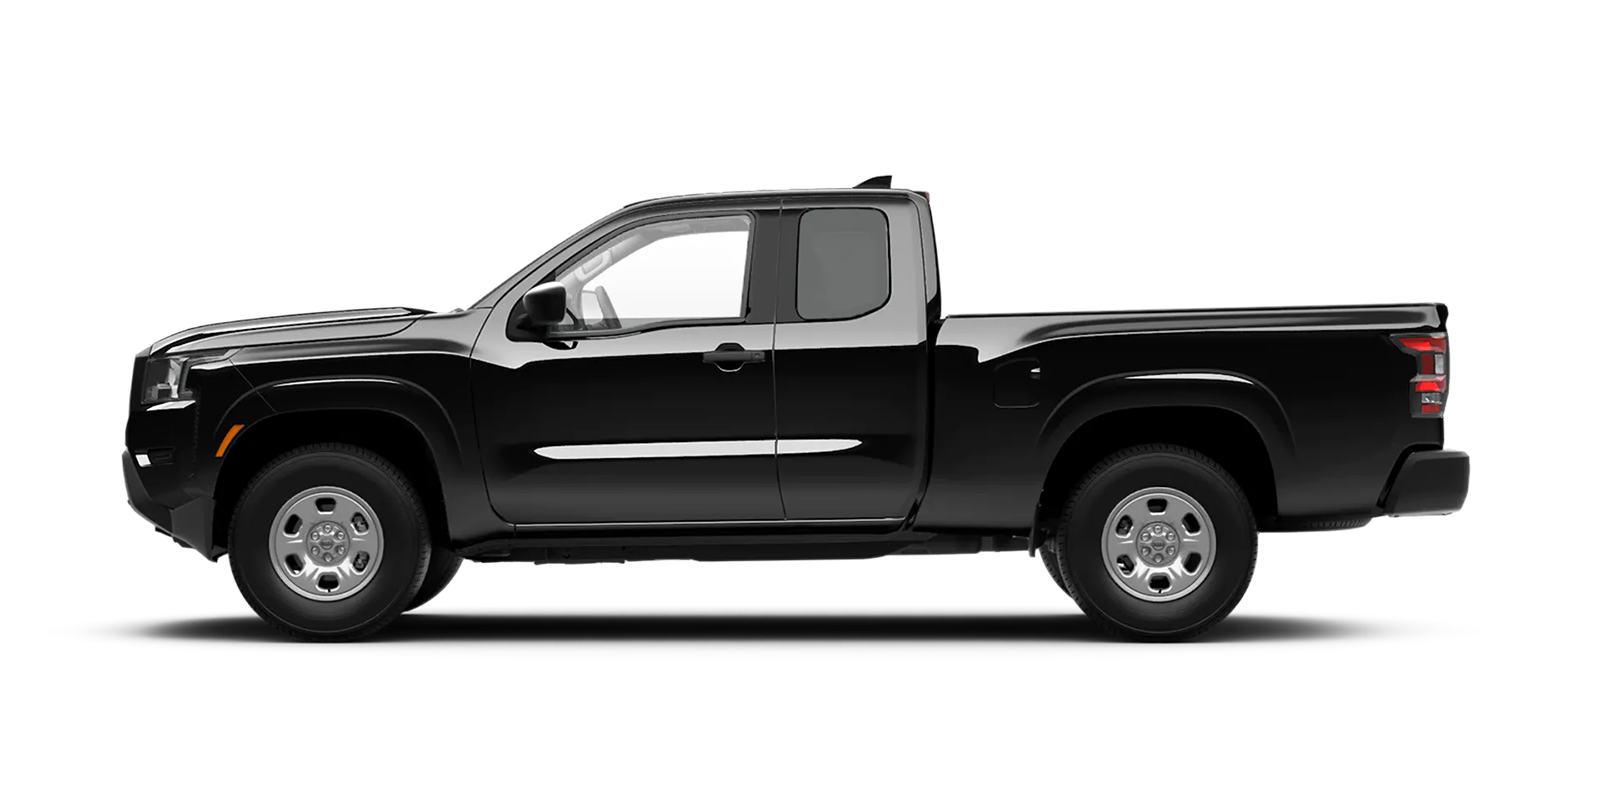 2022 Frontier King Cab S 4x4 in Super Black | Neil Huffman Nissan of Frankfort in Frankfort KY